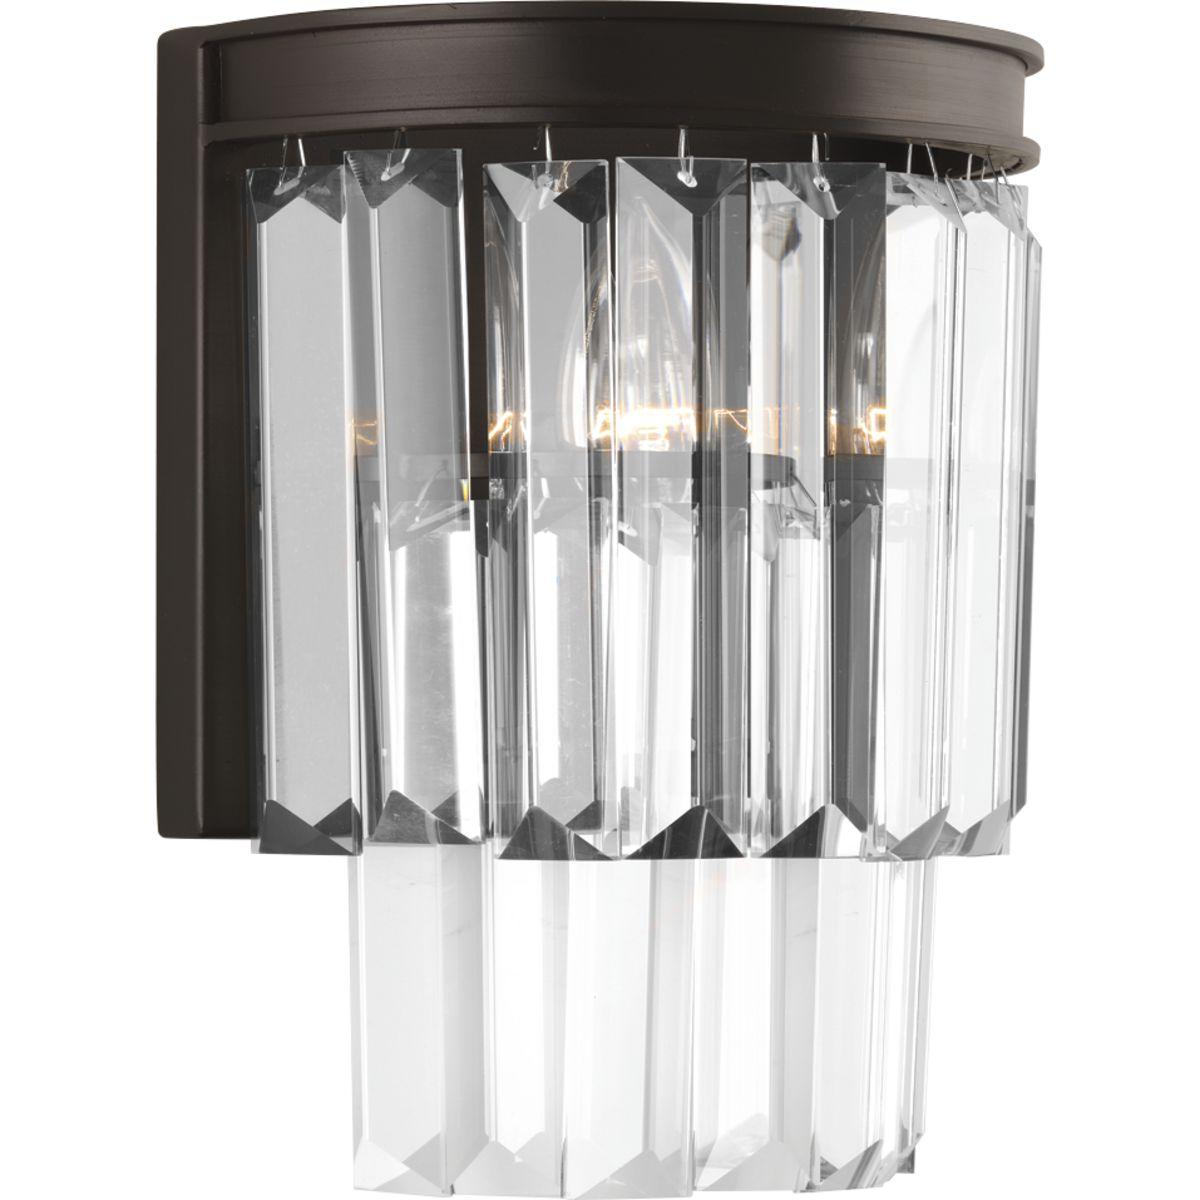 Hubbell P7198-20 Elements that sparkle create an instant statement within the home, making the Glimmer collection the definition of livable luxury. An architecturally styled frame in an Antique Bronze finish supports the prismatic glass pendants.  ; Elements that sparkle 